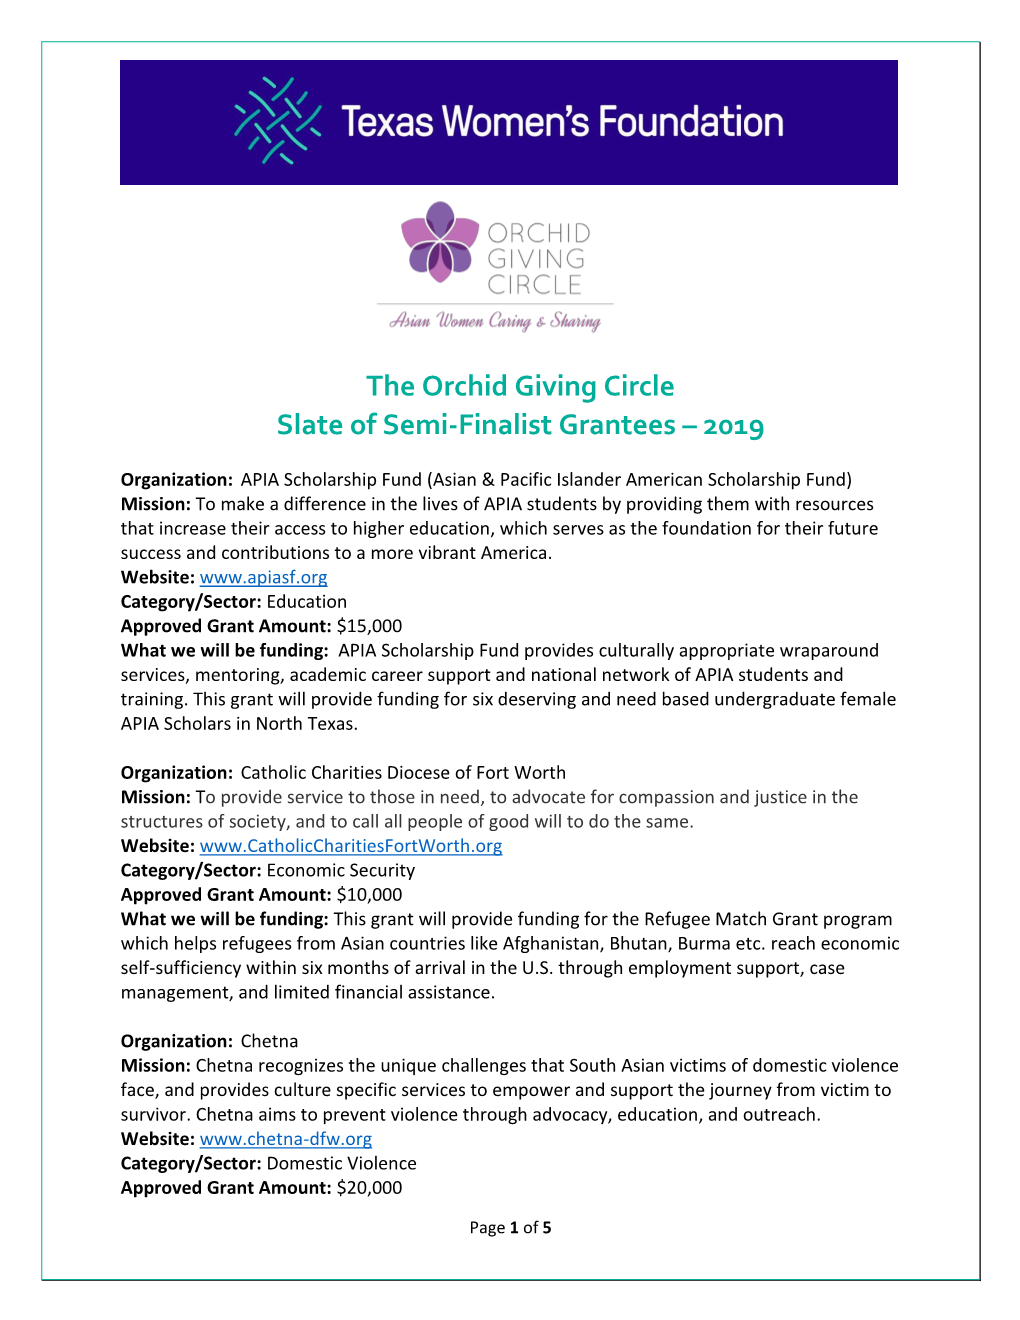 The Orchid Giving Circle Slate of Semi-Finalist Grantees – 2019